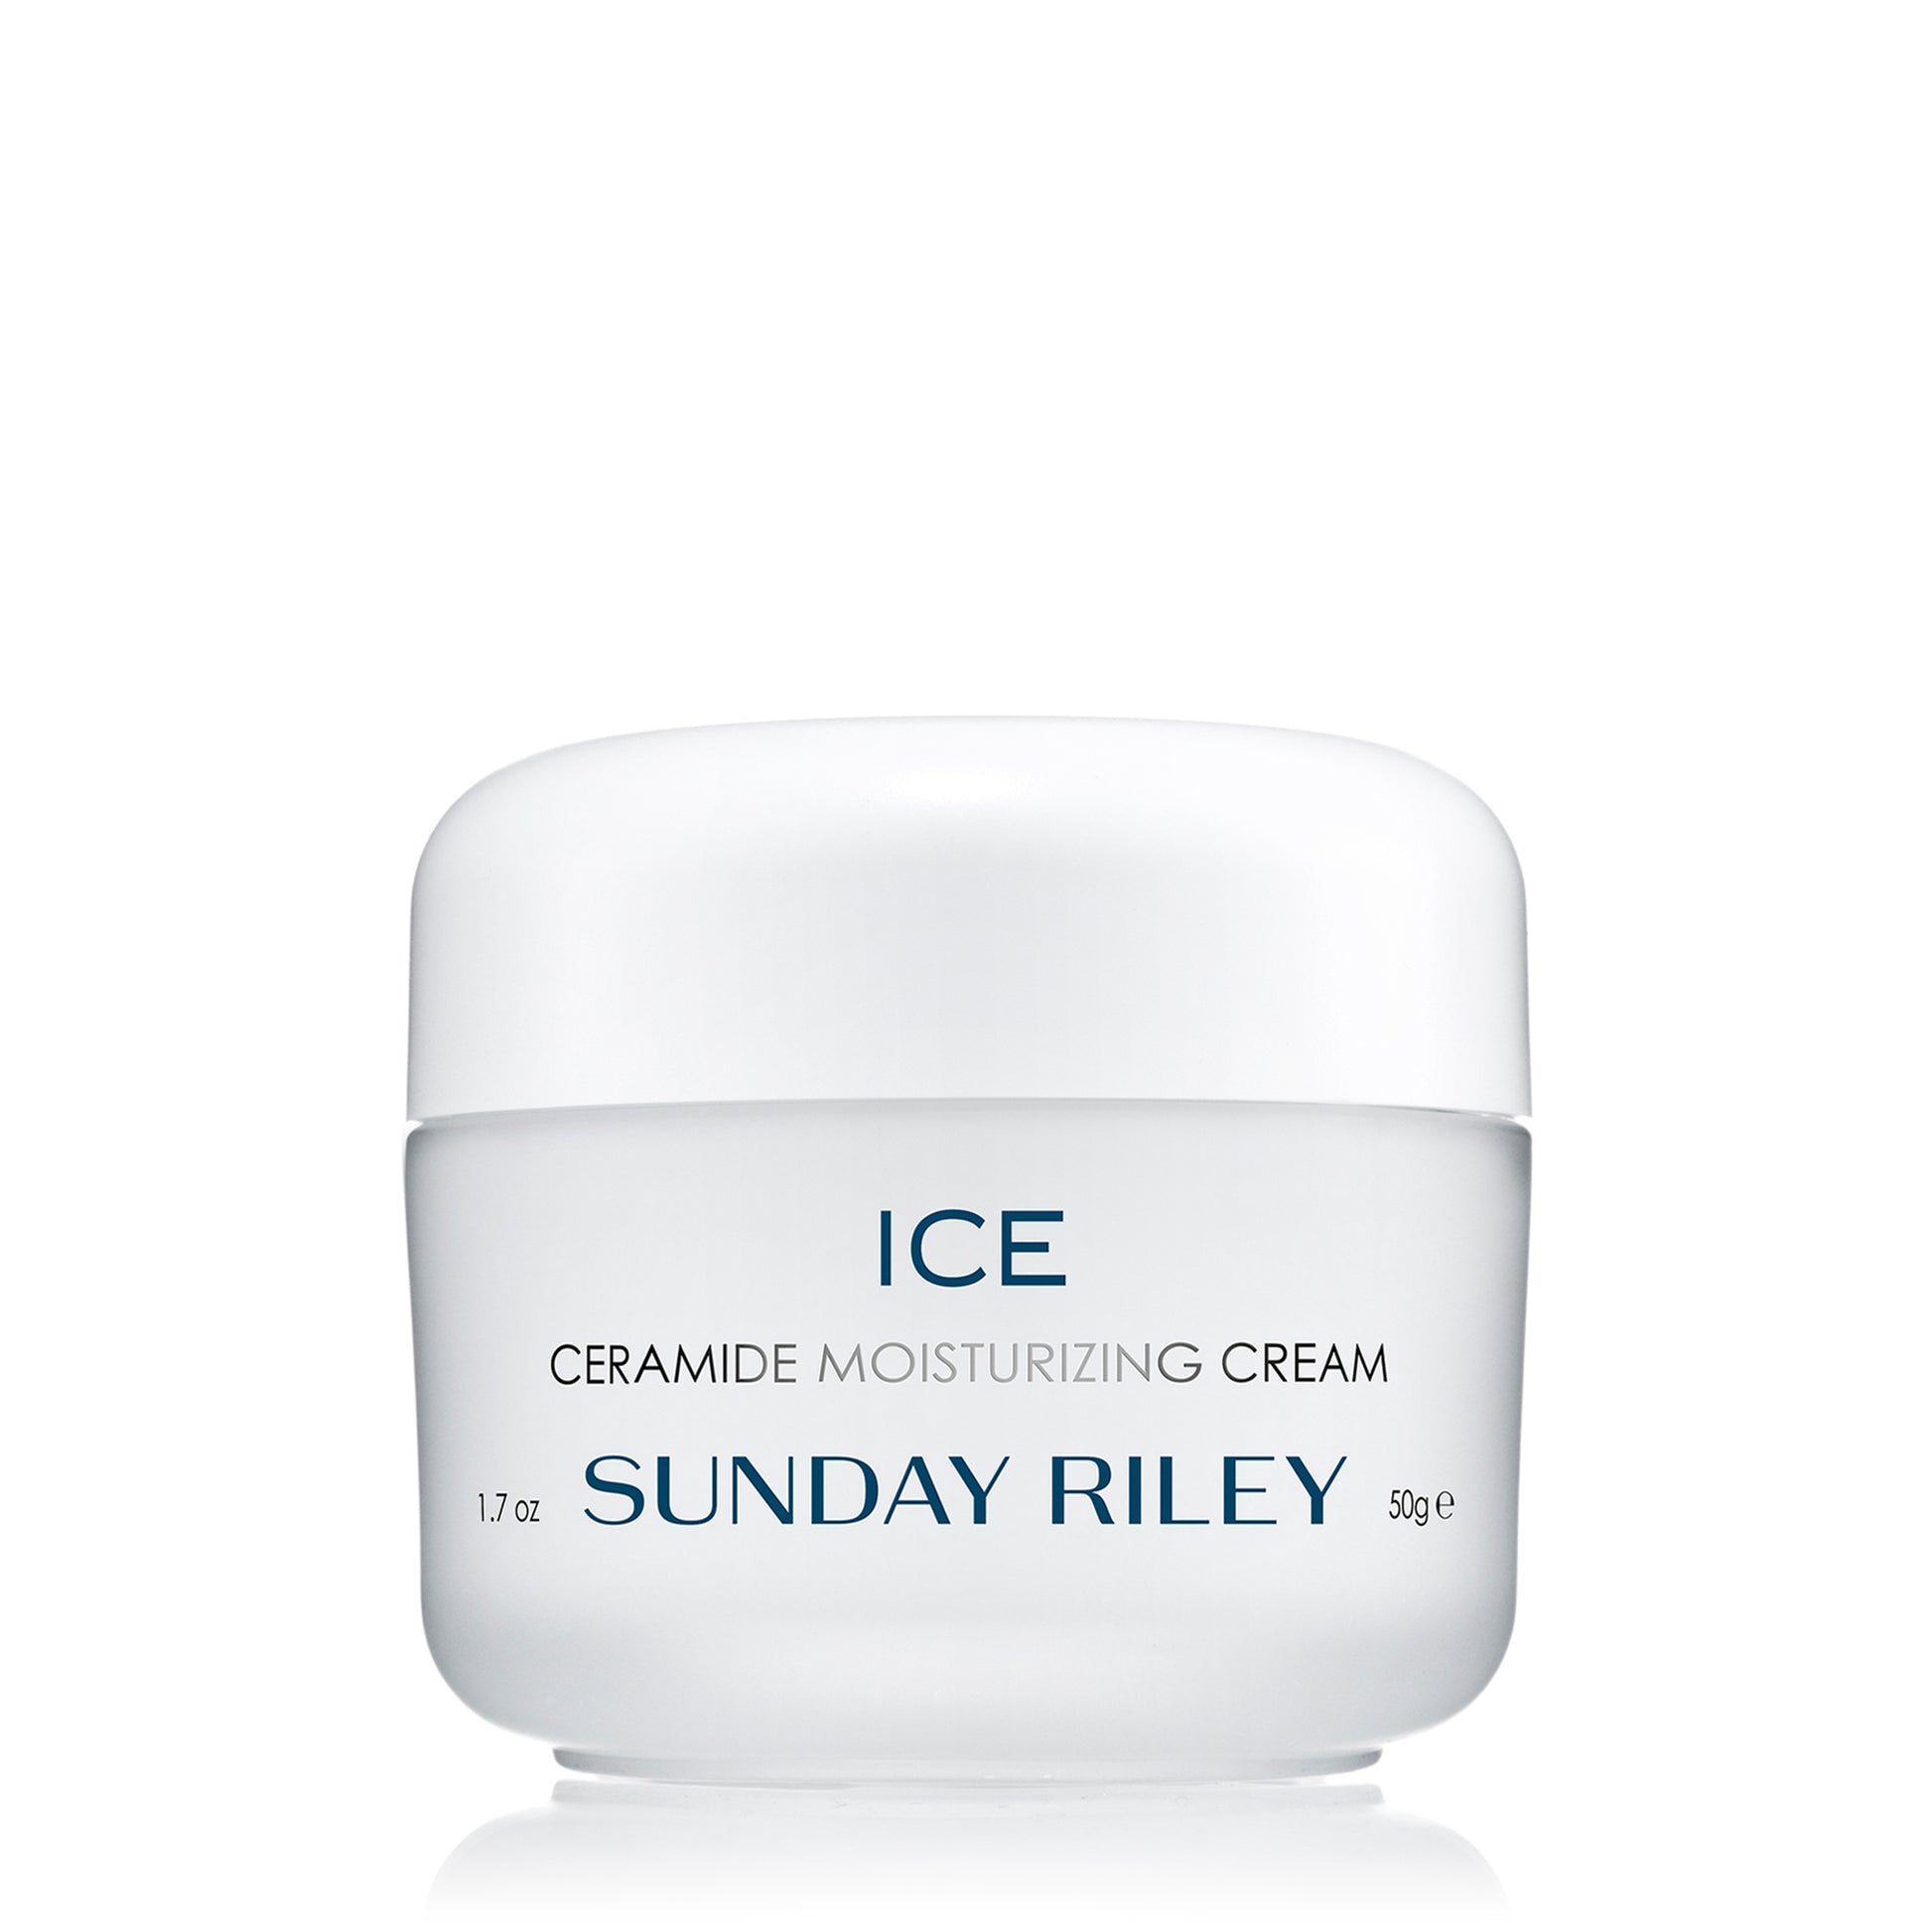 Ice Ceramide Moisturizing Cream, packaged in white frosted glass jar with white lid Edit alt text